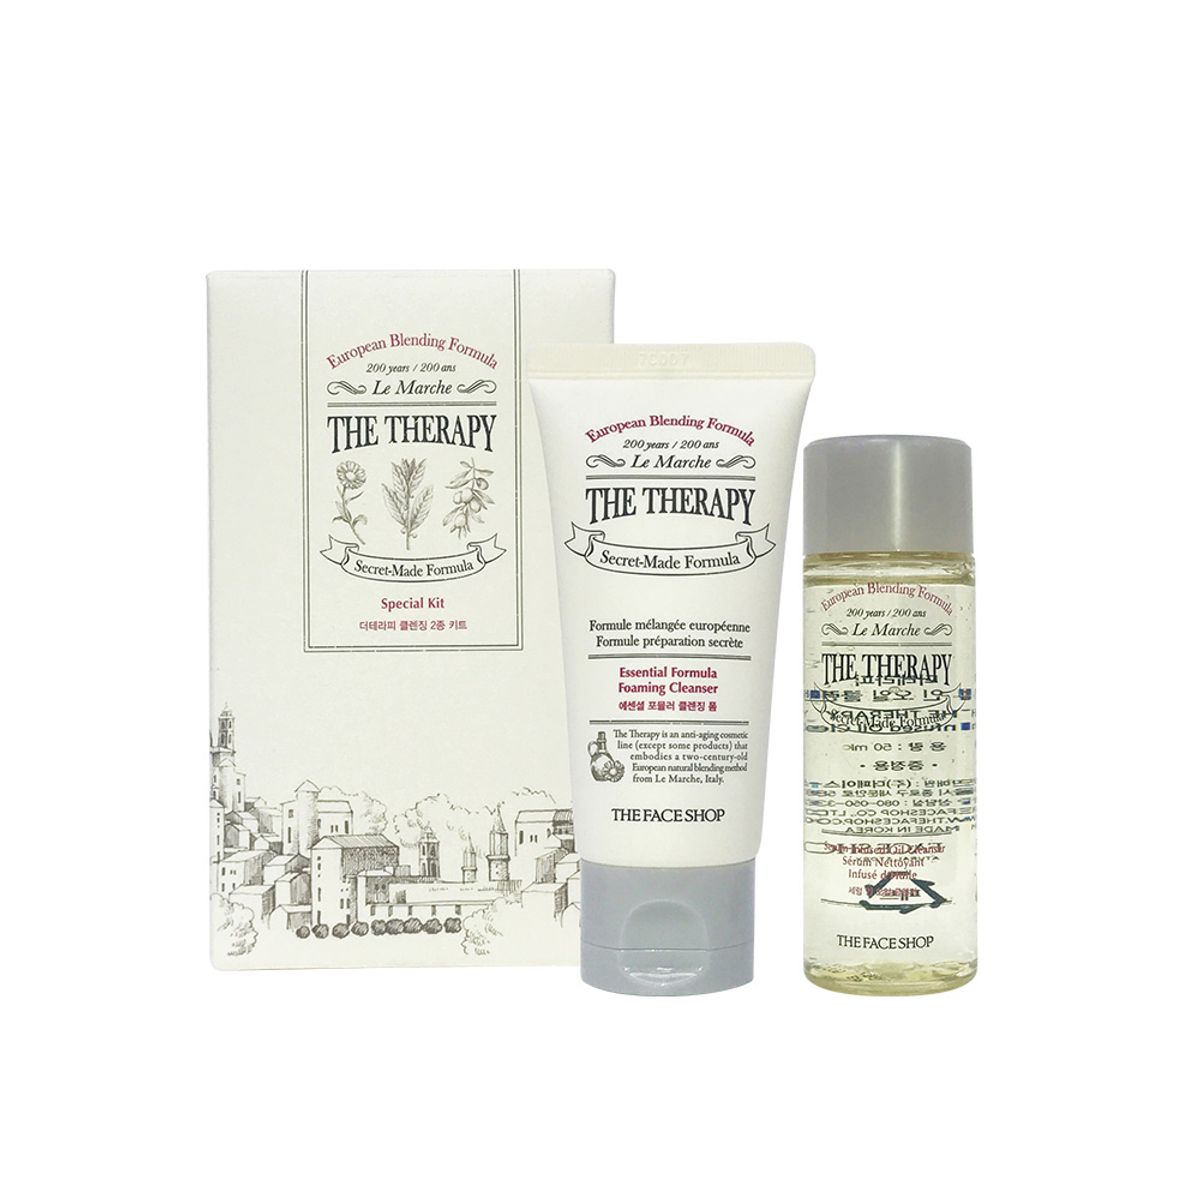 the-therapy-cleansing-kit-2ea-gwp-1